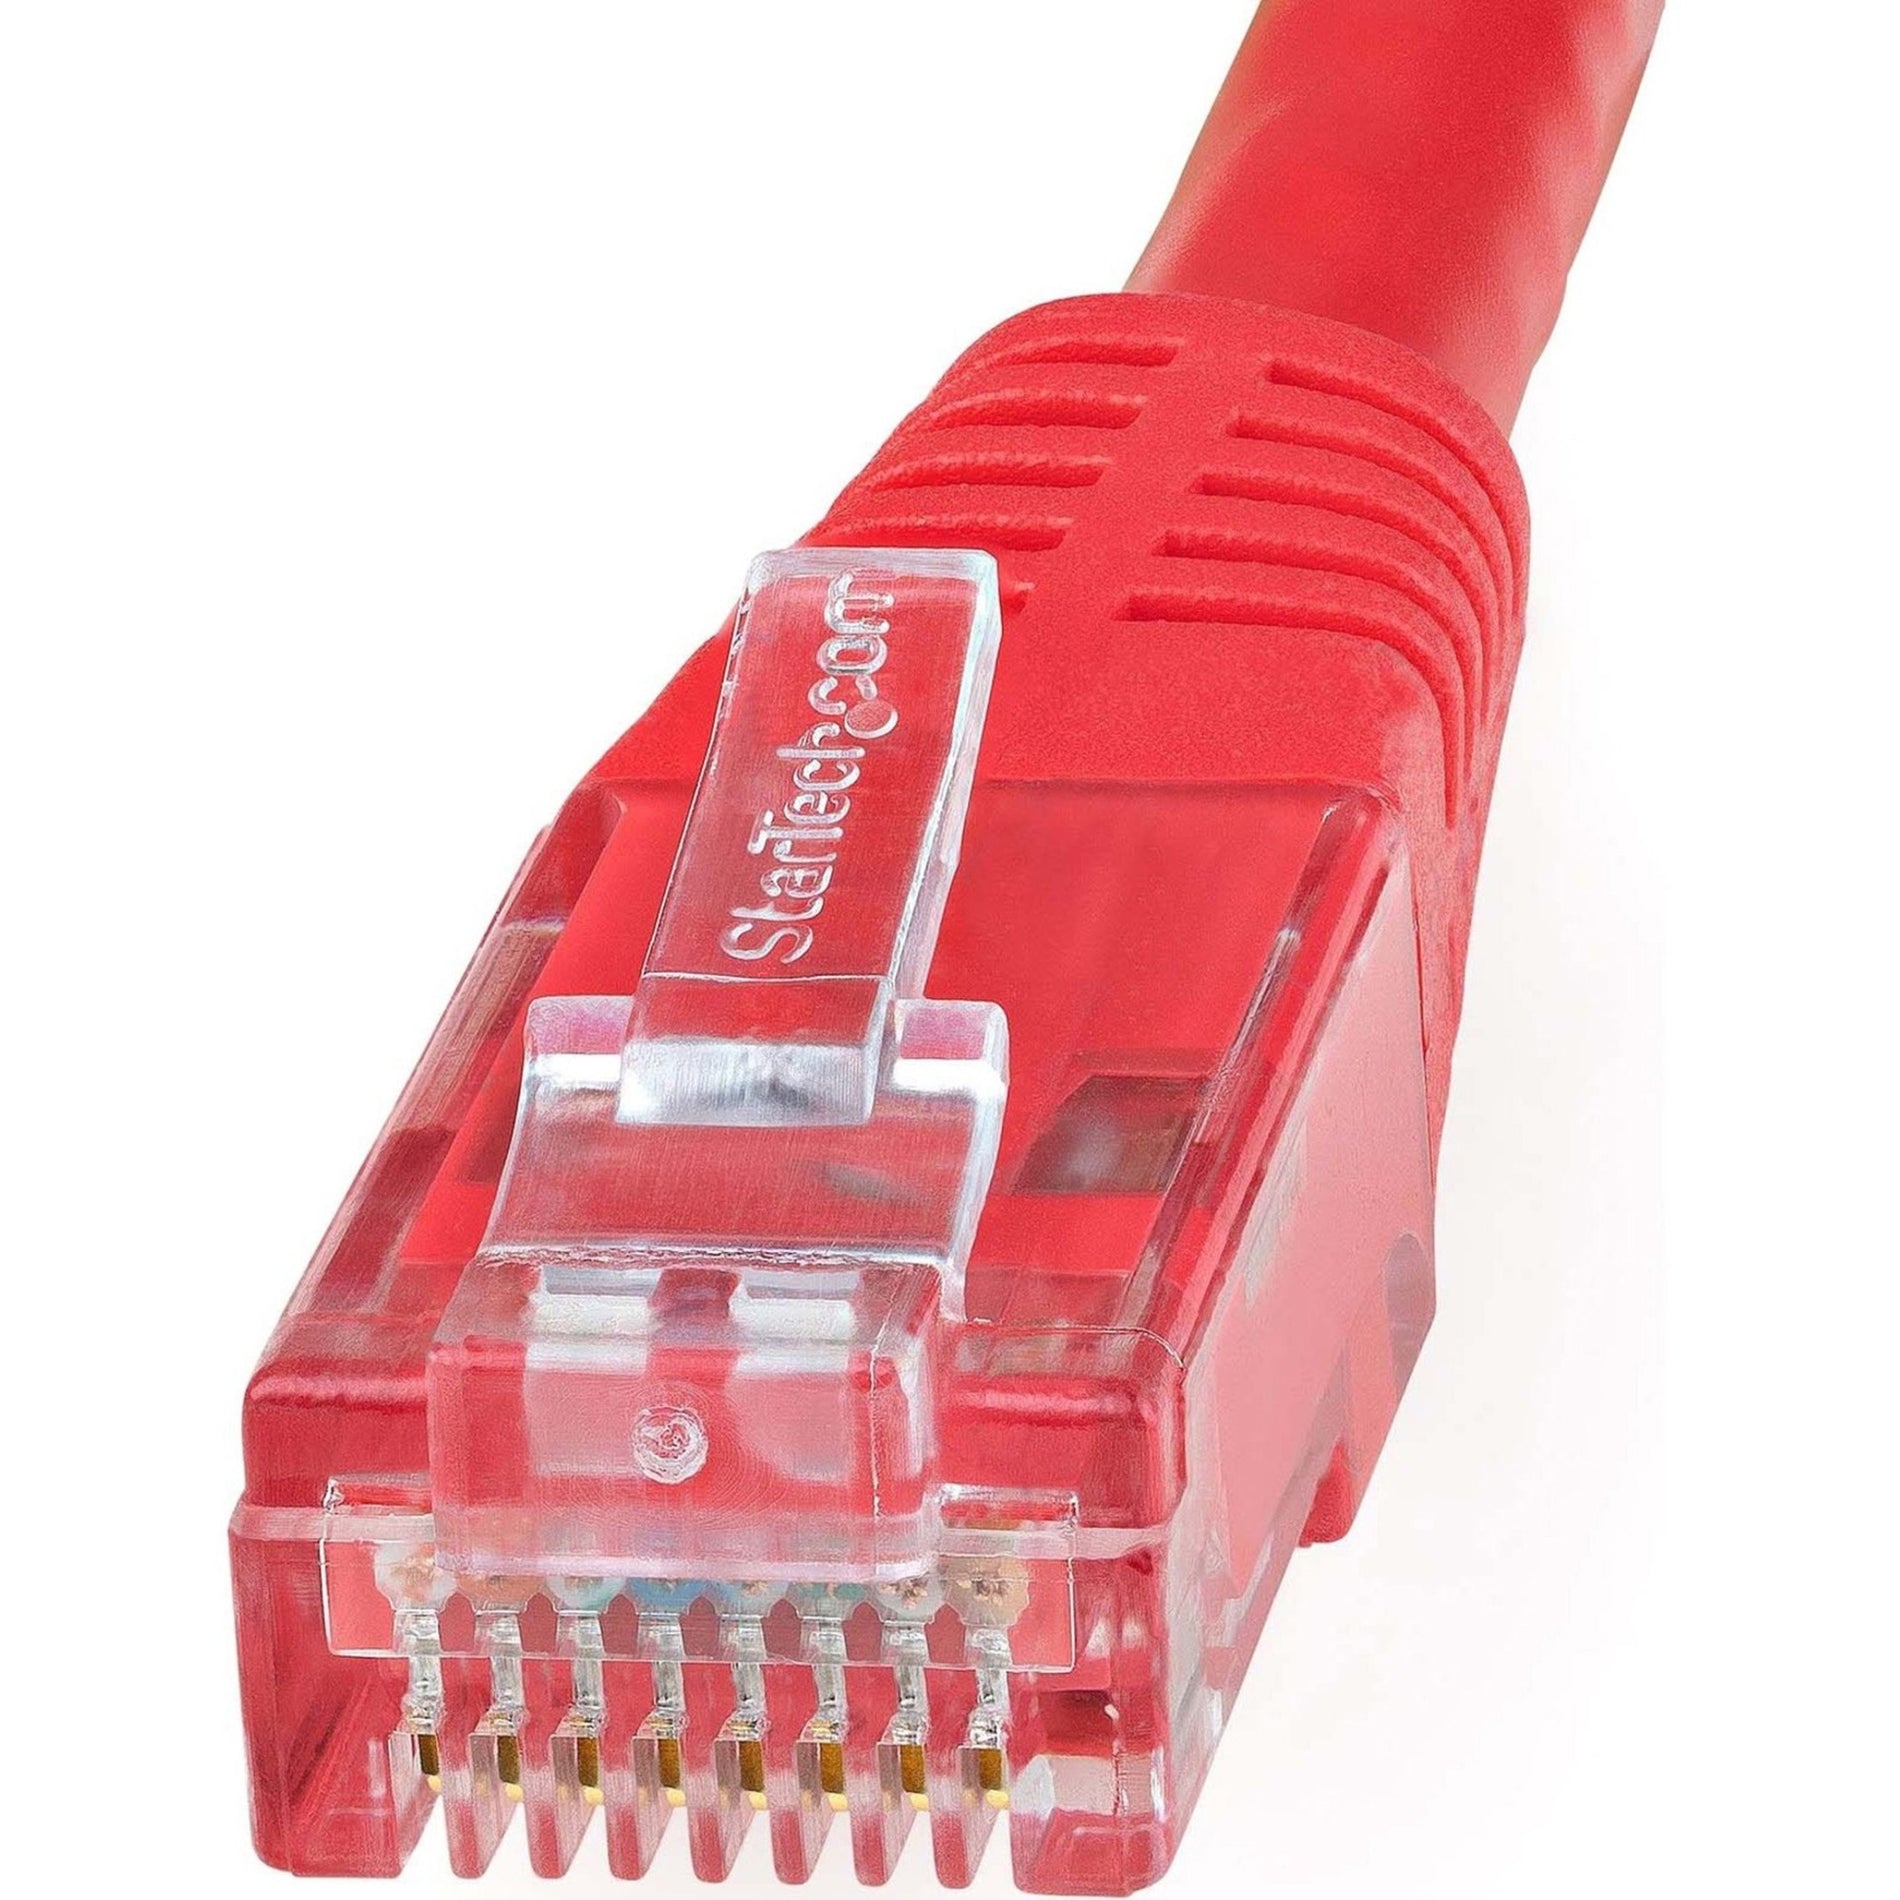 StarTech.com C6PATCH5RD 5ft Red Cat6 UTP Patch Cable ETL Verified, 10 Gbit/s Data Transfer Rate, Strain Relief